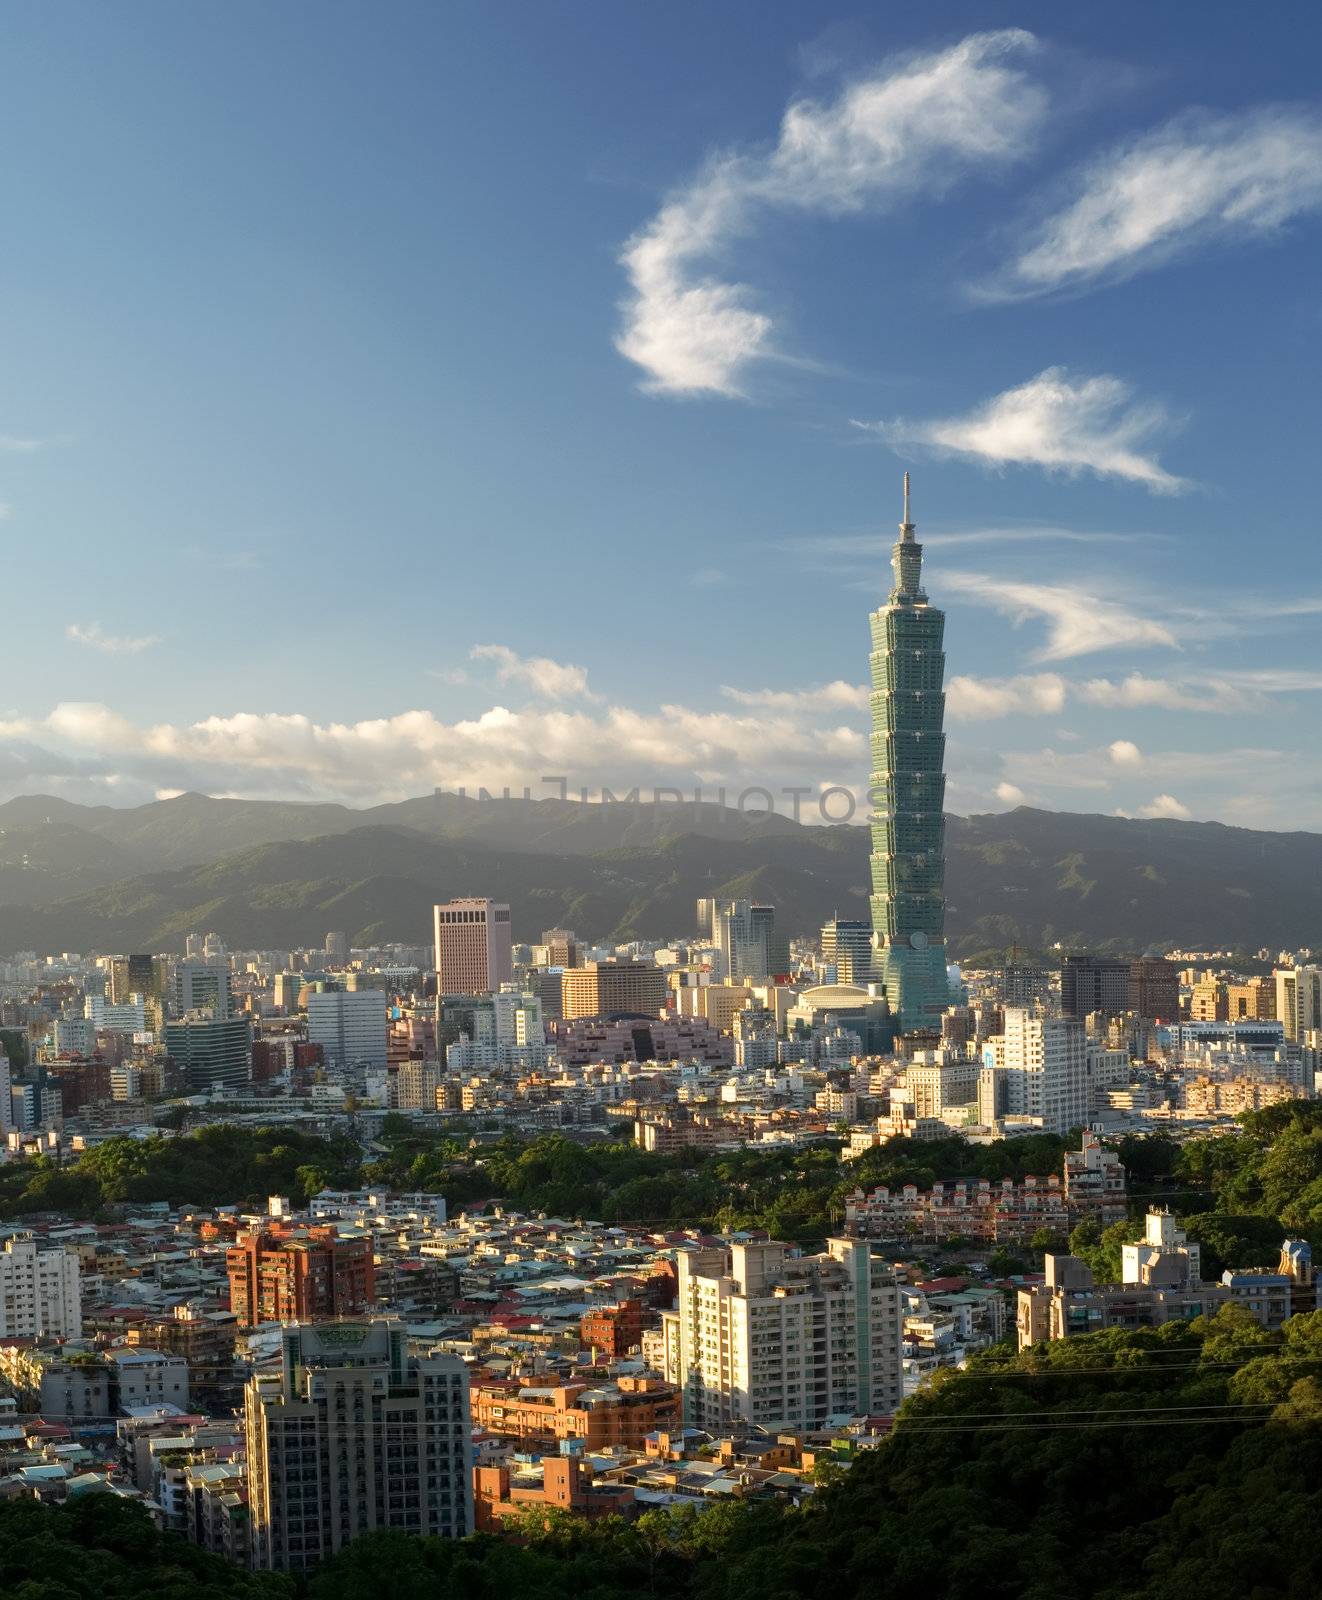 It is a beautiful cityscape in Taipei of Taiwan.